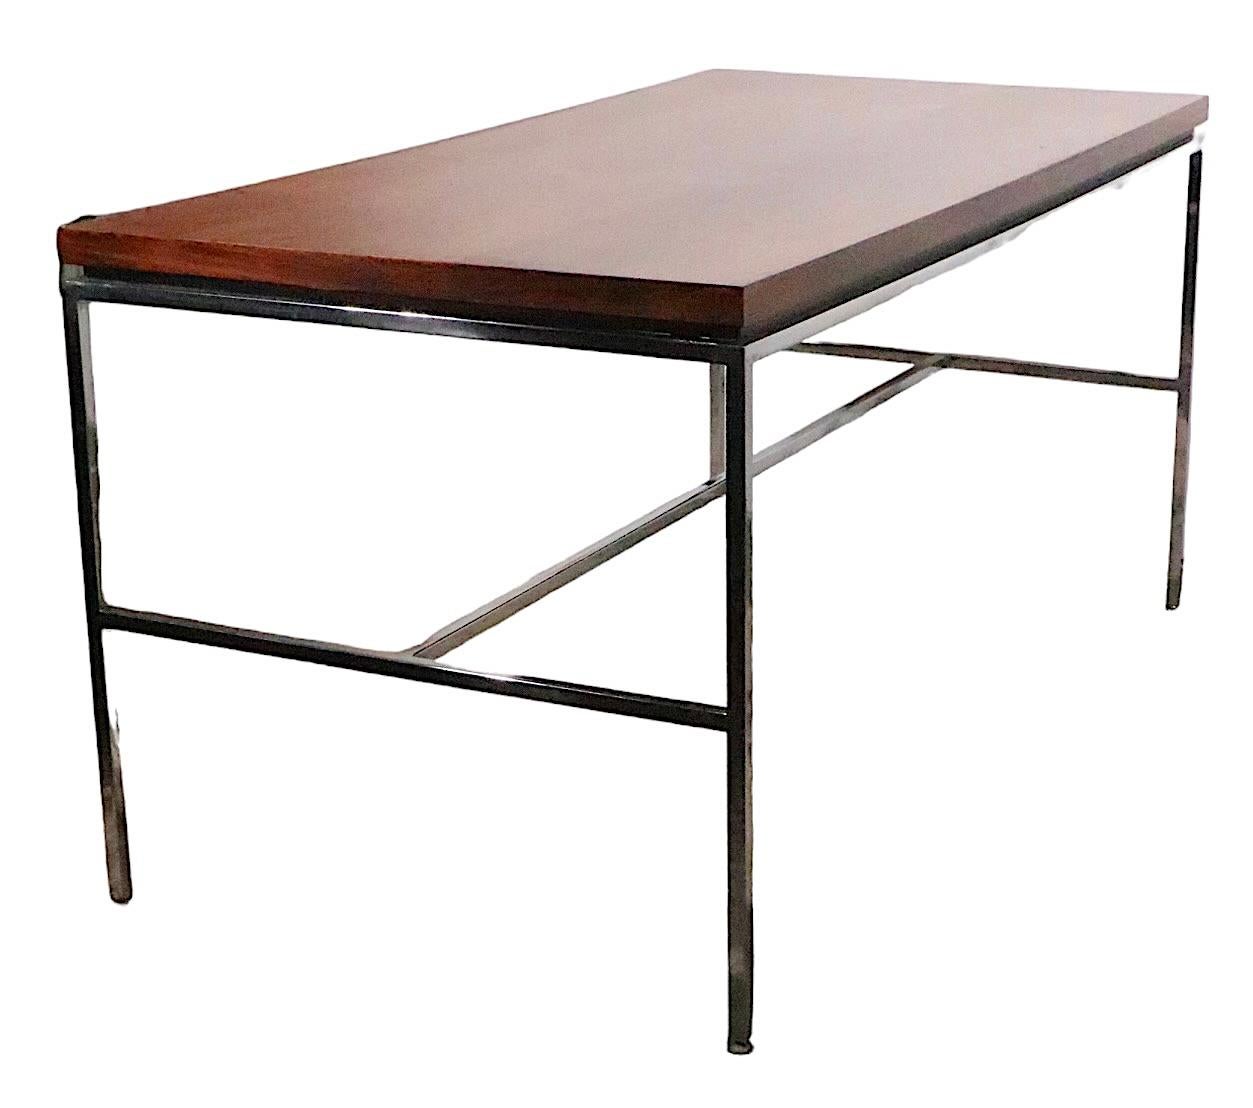 Mid-Century Modern Rosewood and Chrome Drexel Index Writing Desk Library Table, circa 1970s For Sale